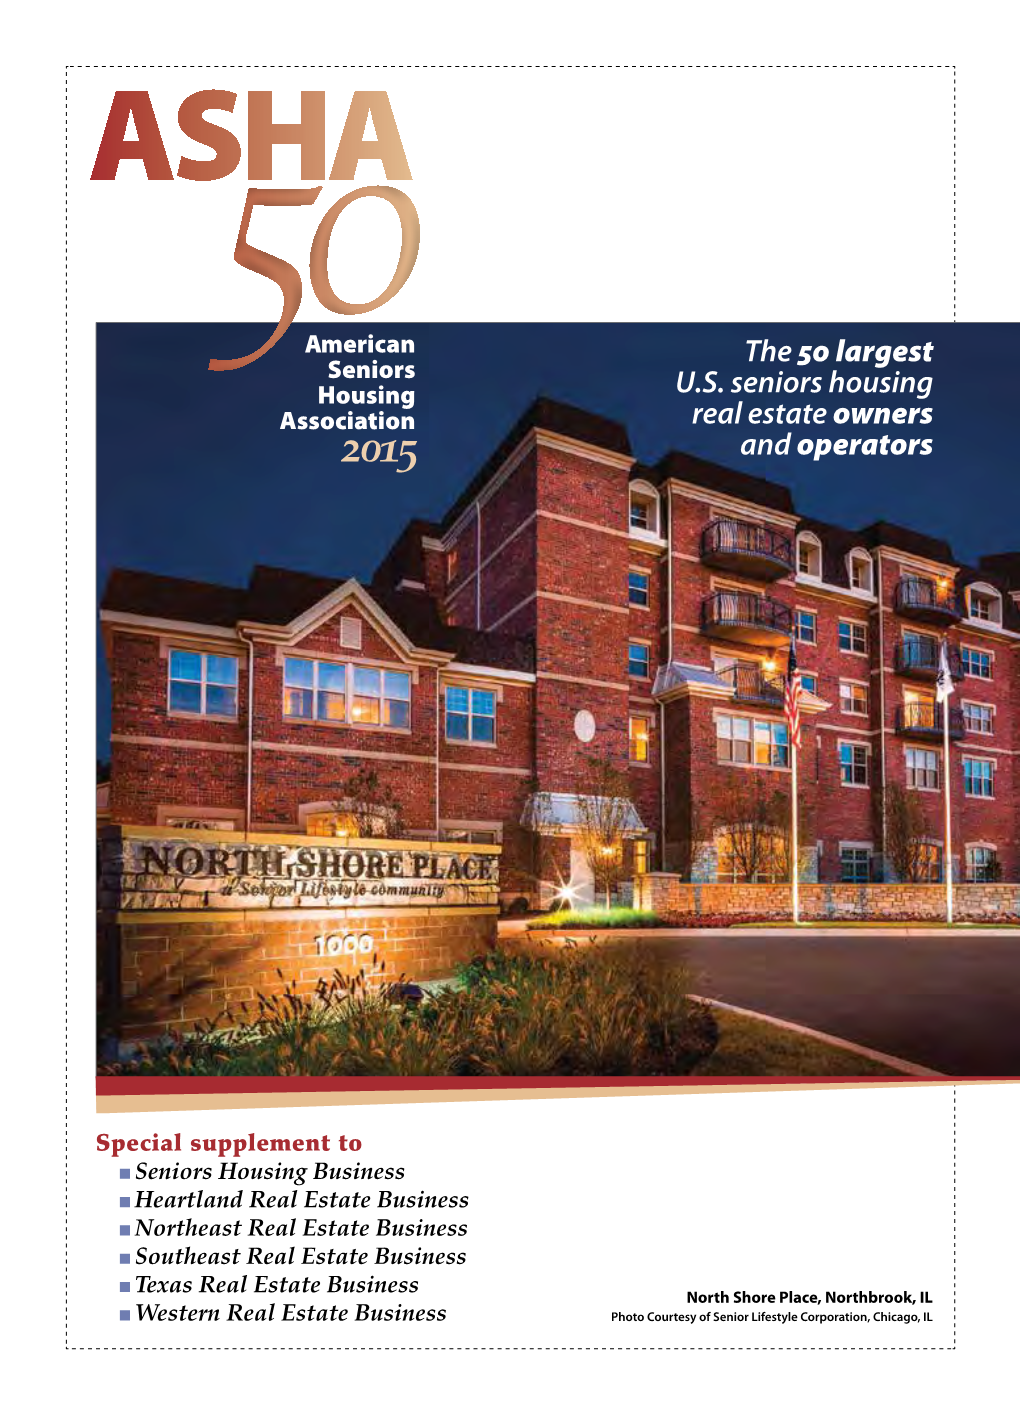 The 50 Largest U.S. Seniors Housing Real Estate Owners and Operators